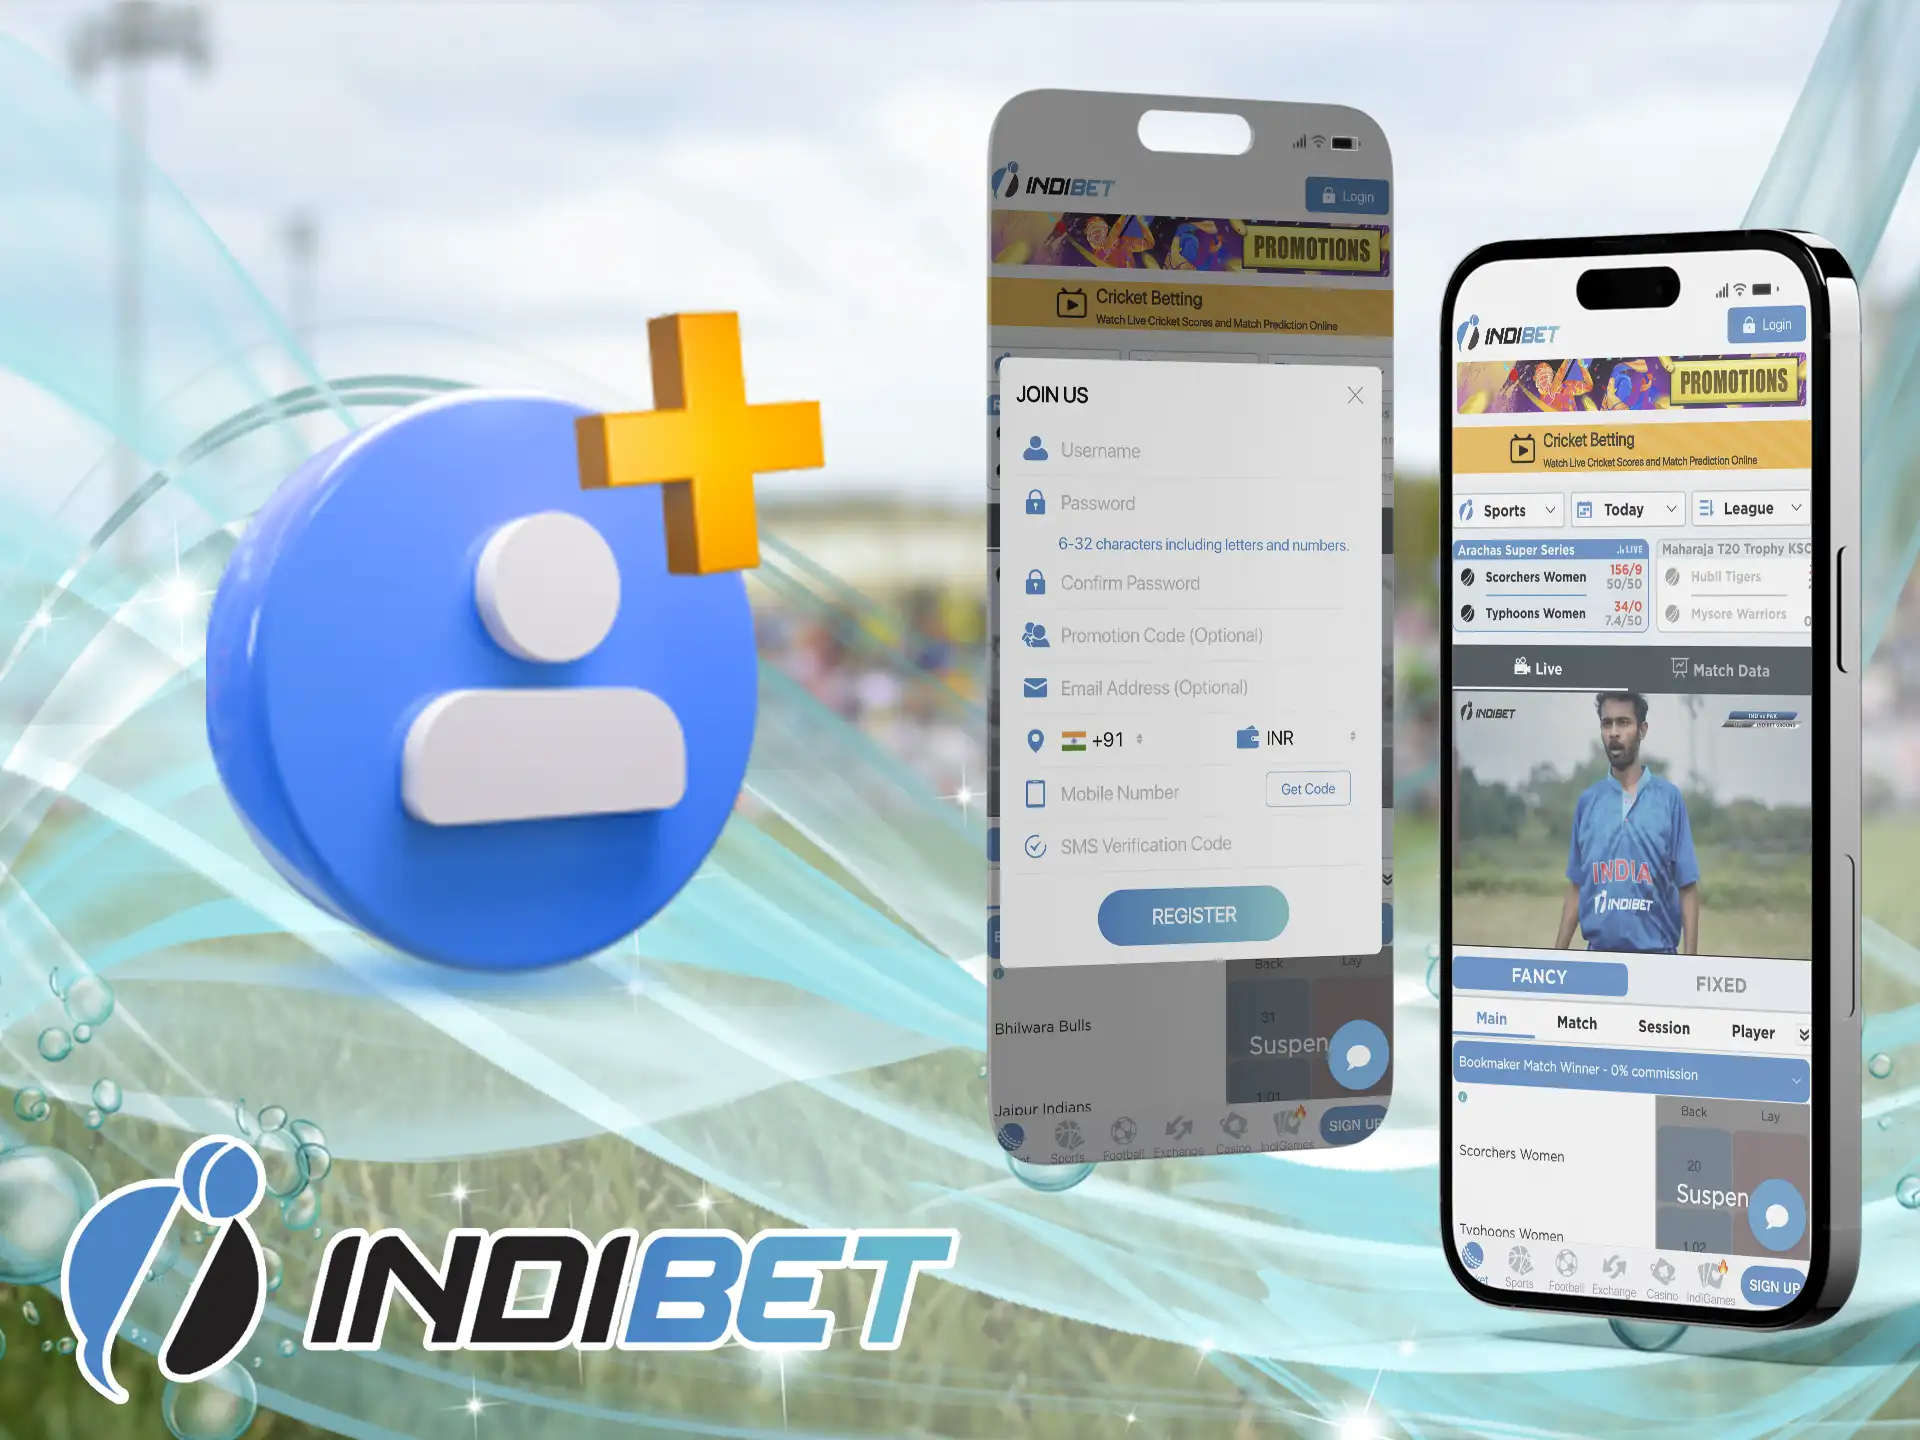 Place your bets from the comfort of your own home by simply downloading the official Indibet app.